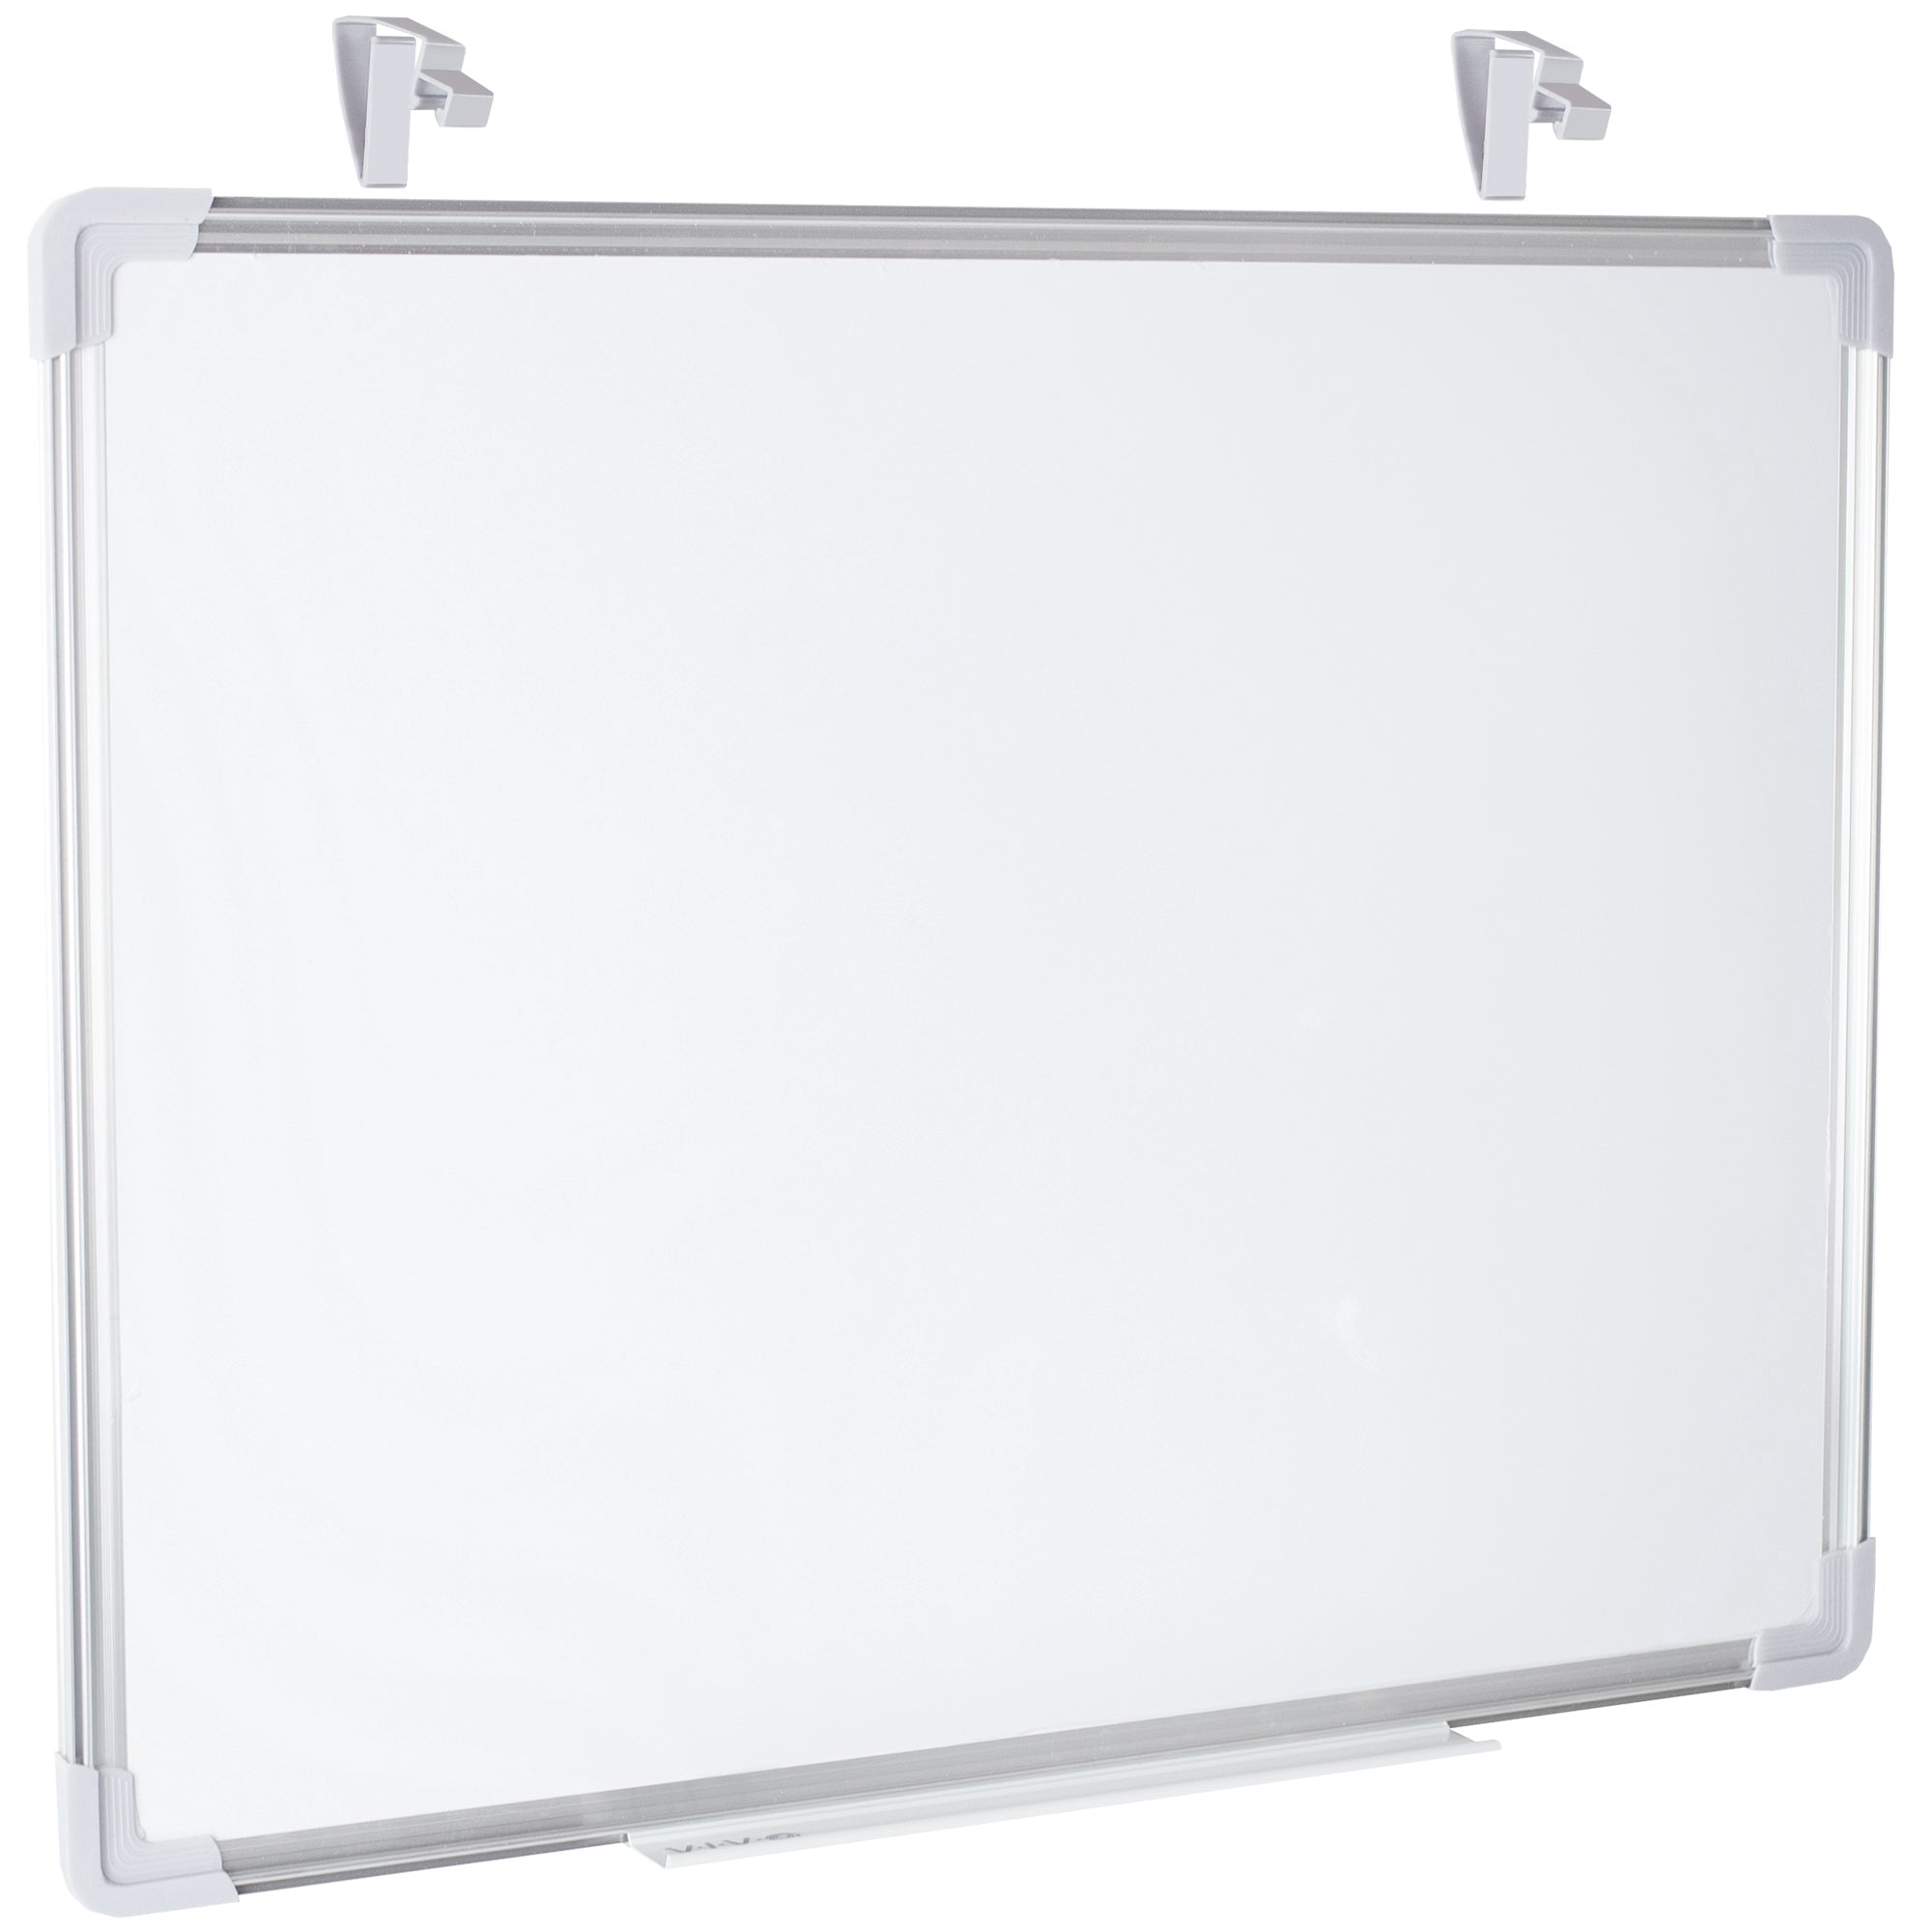 Hanging 24 x 20 Whiteboard – VIVO - desk solutions, screen mounting, and  more